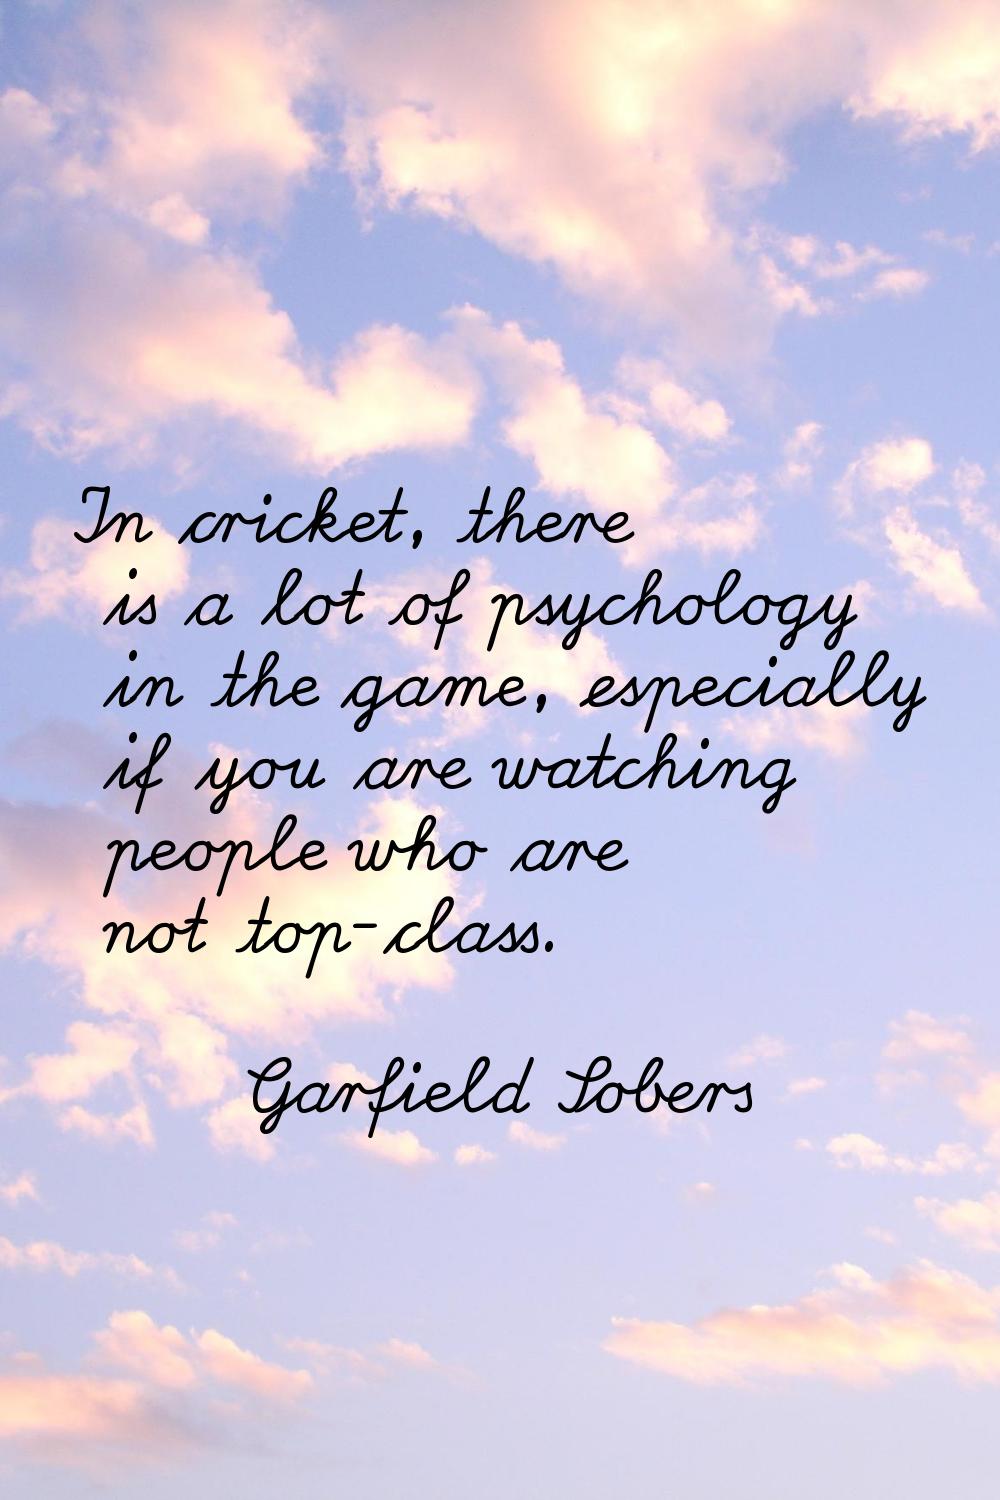 In cricket, there is a lot of psychology in the game, especially if you are watching people who are